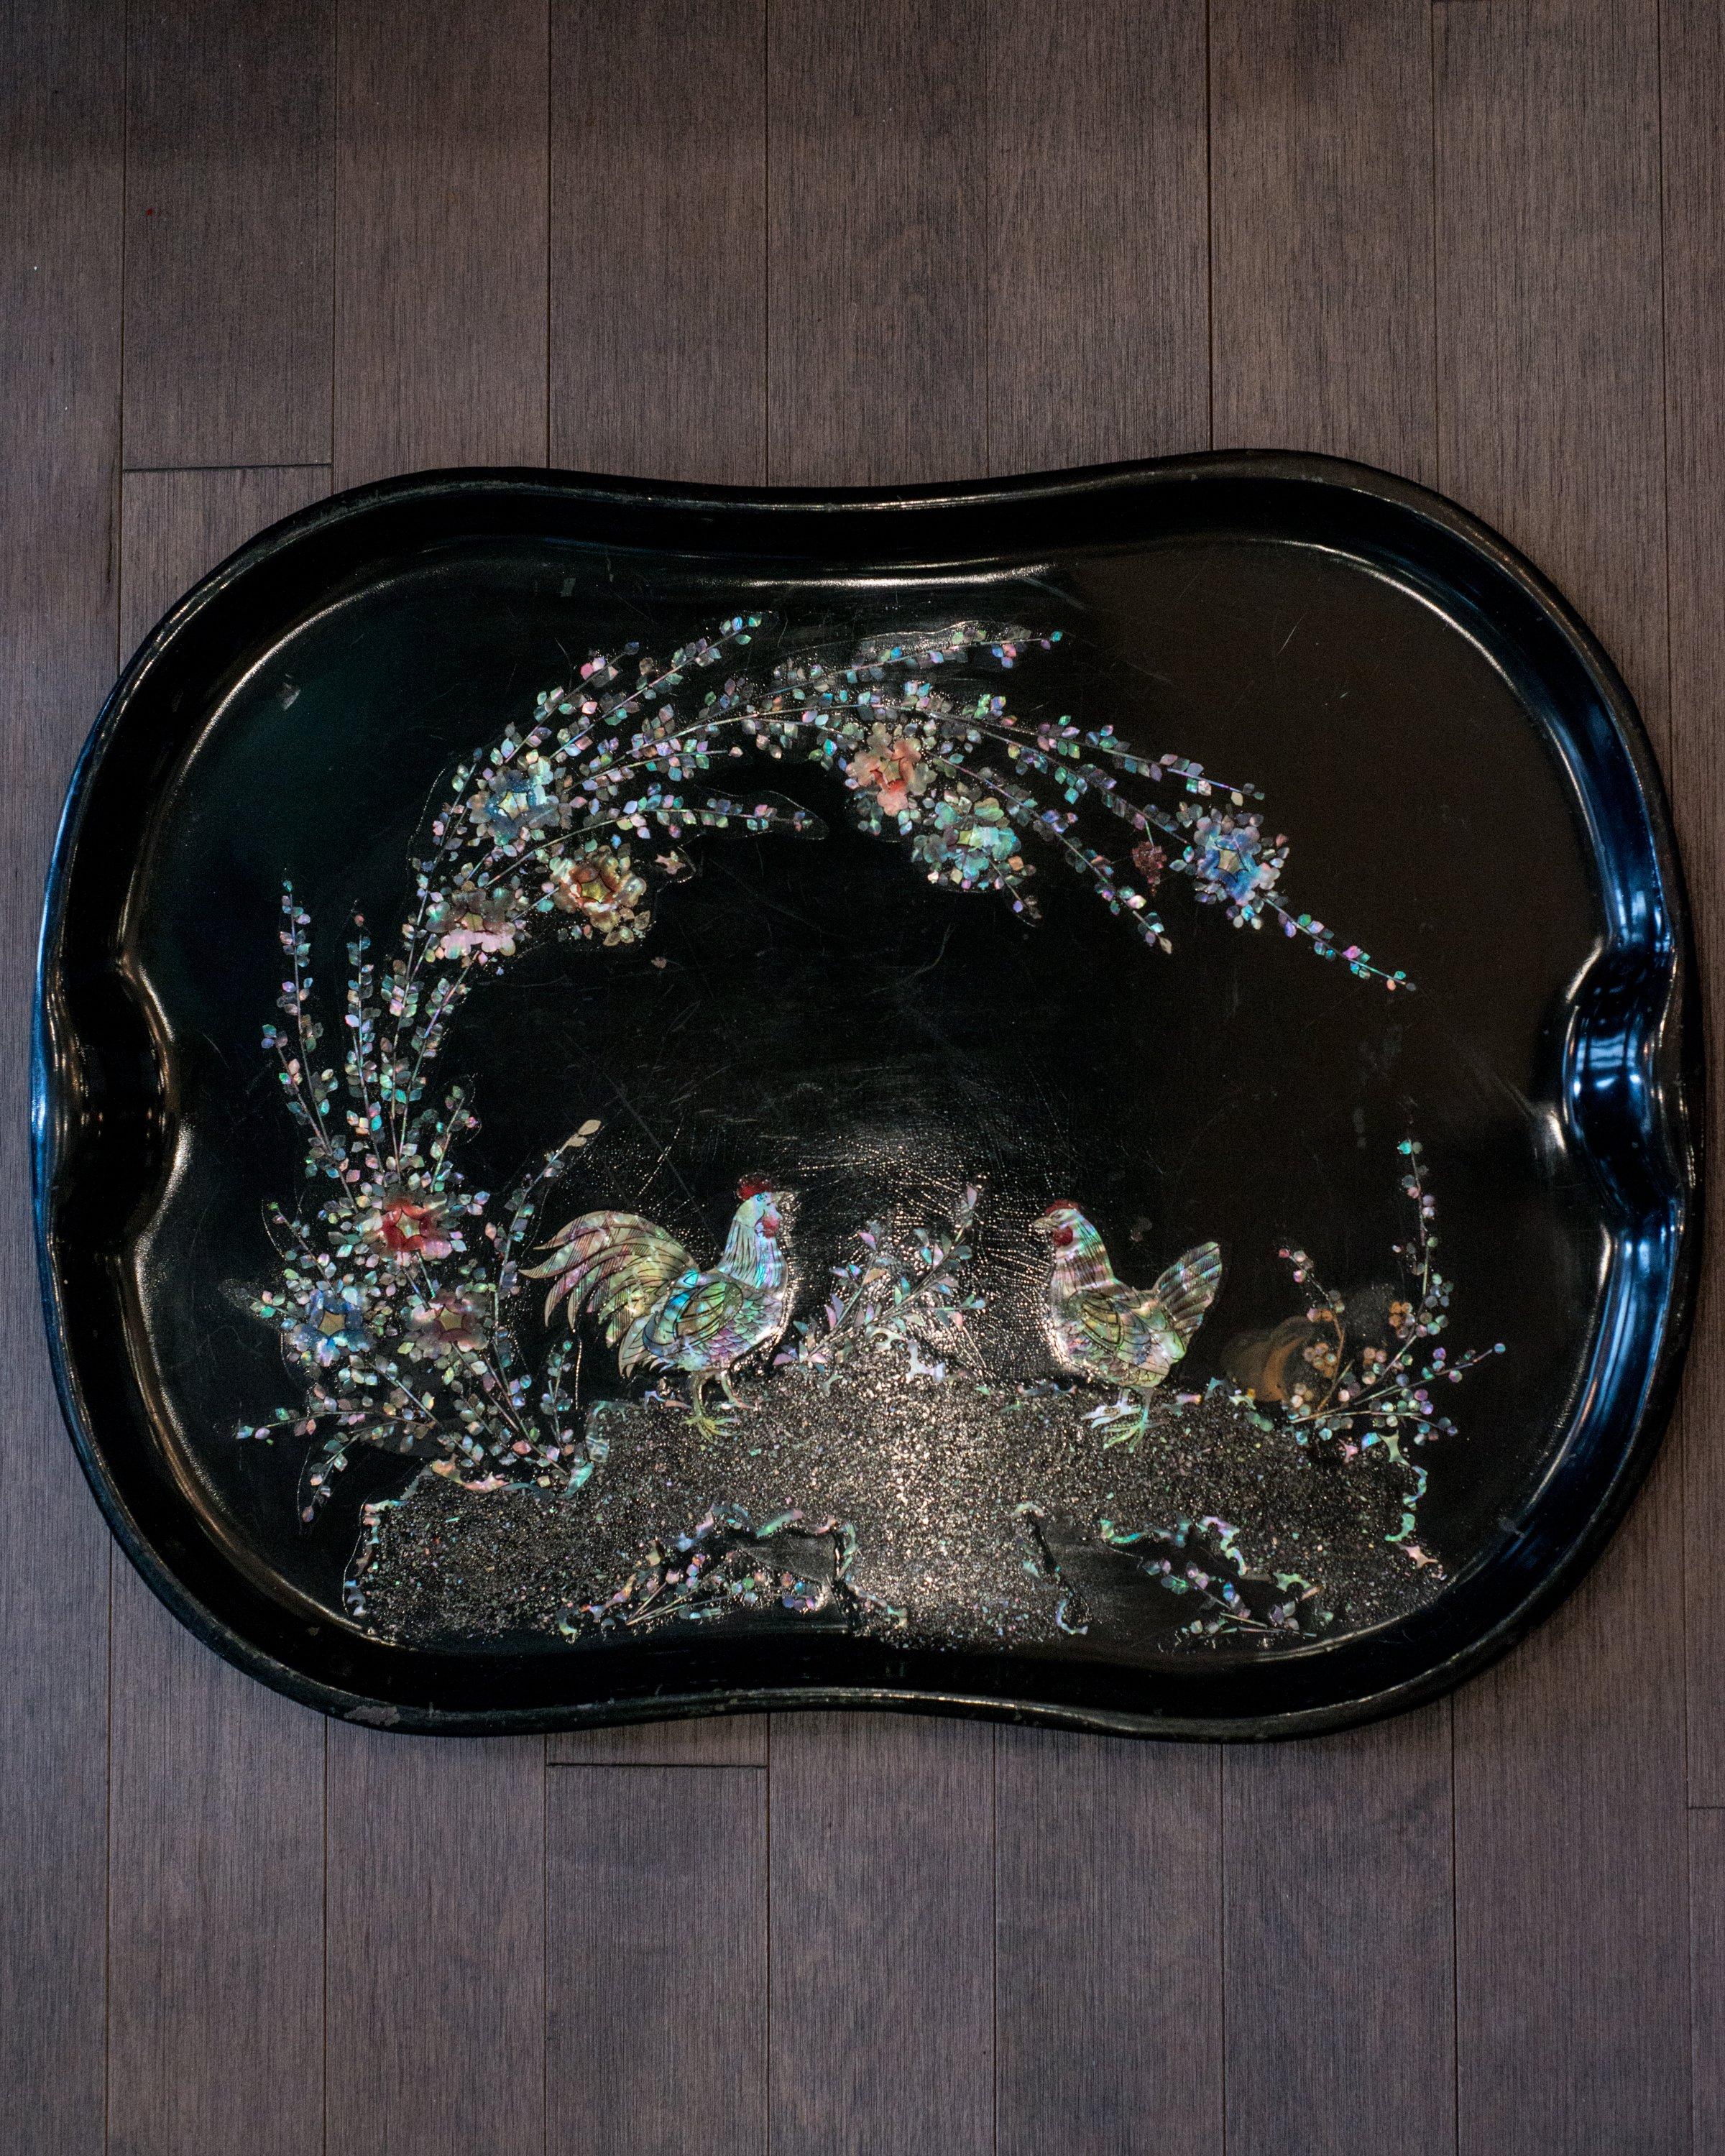 This unique antique Dutch metal tray with mother of pearl inlaid roosters was sourced on a trip to Holland.